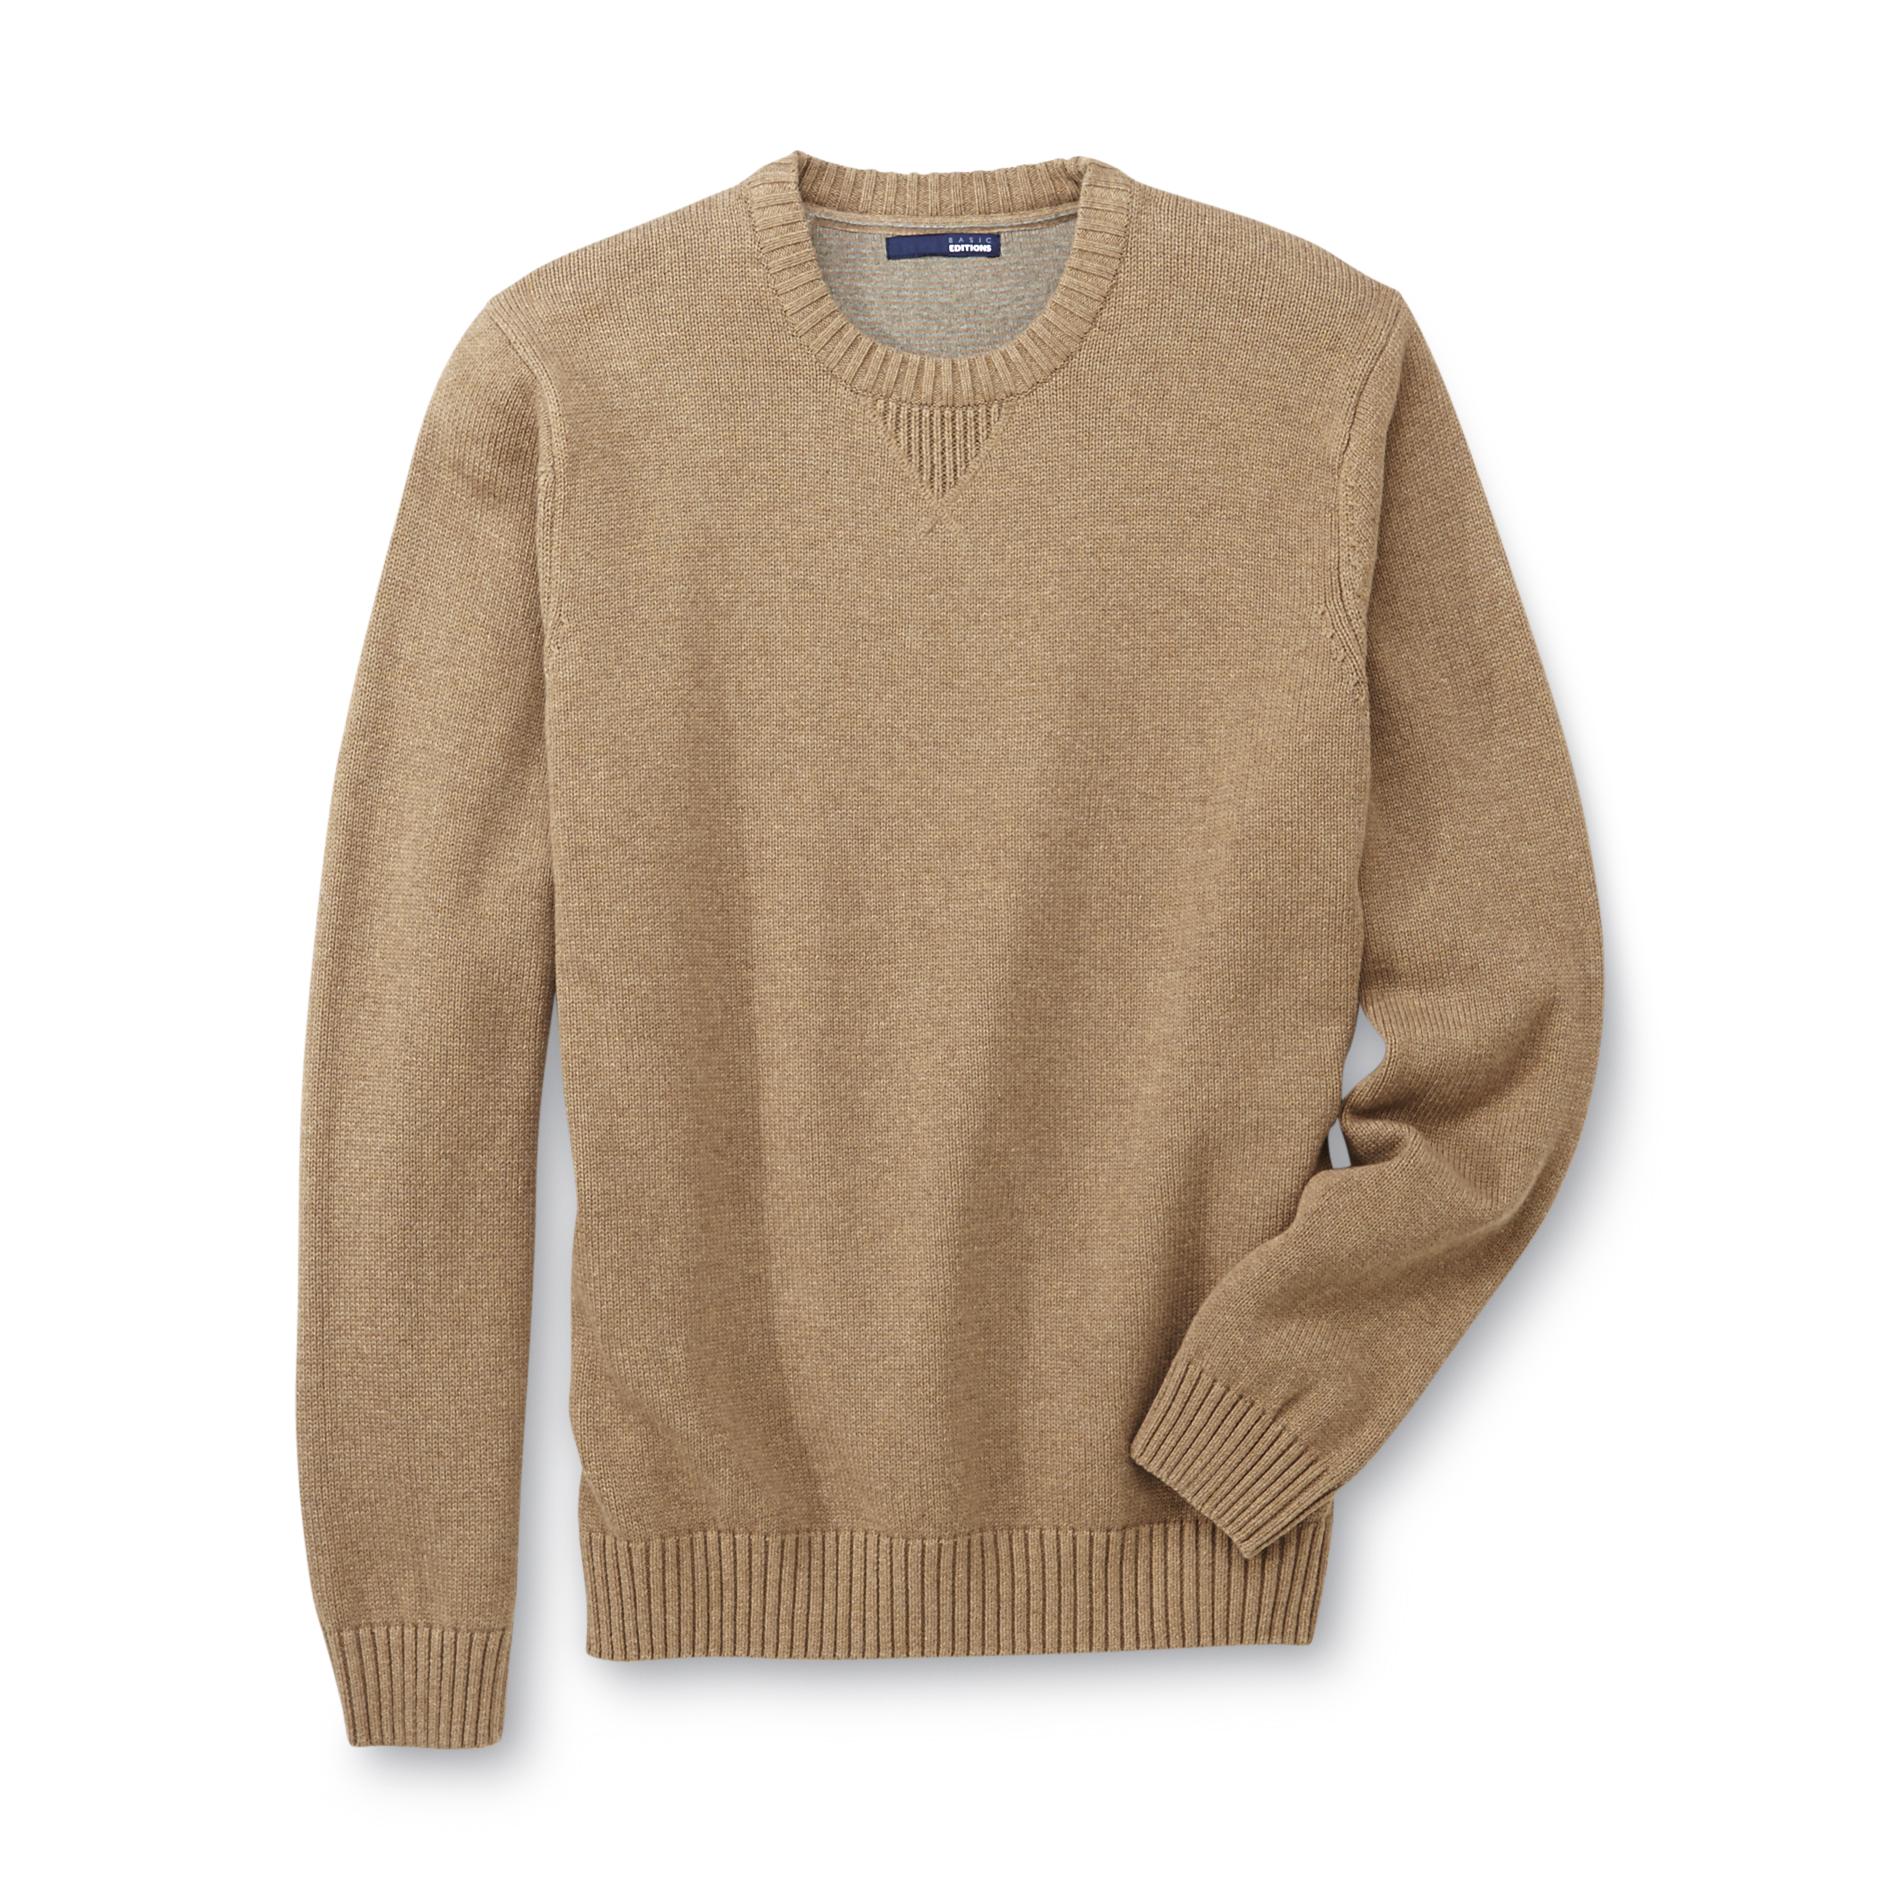 Basic Editions Men's Knit Pullover Sweater